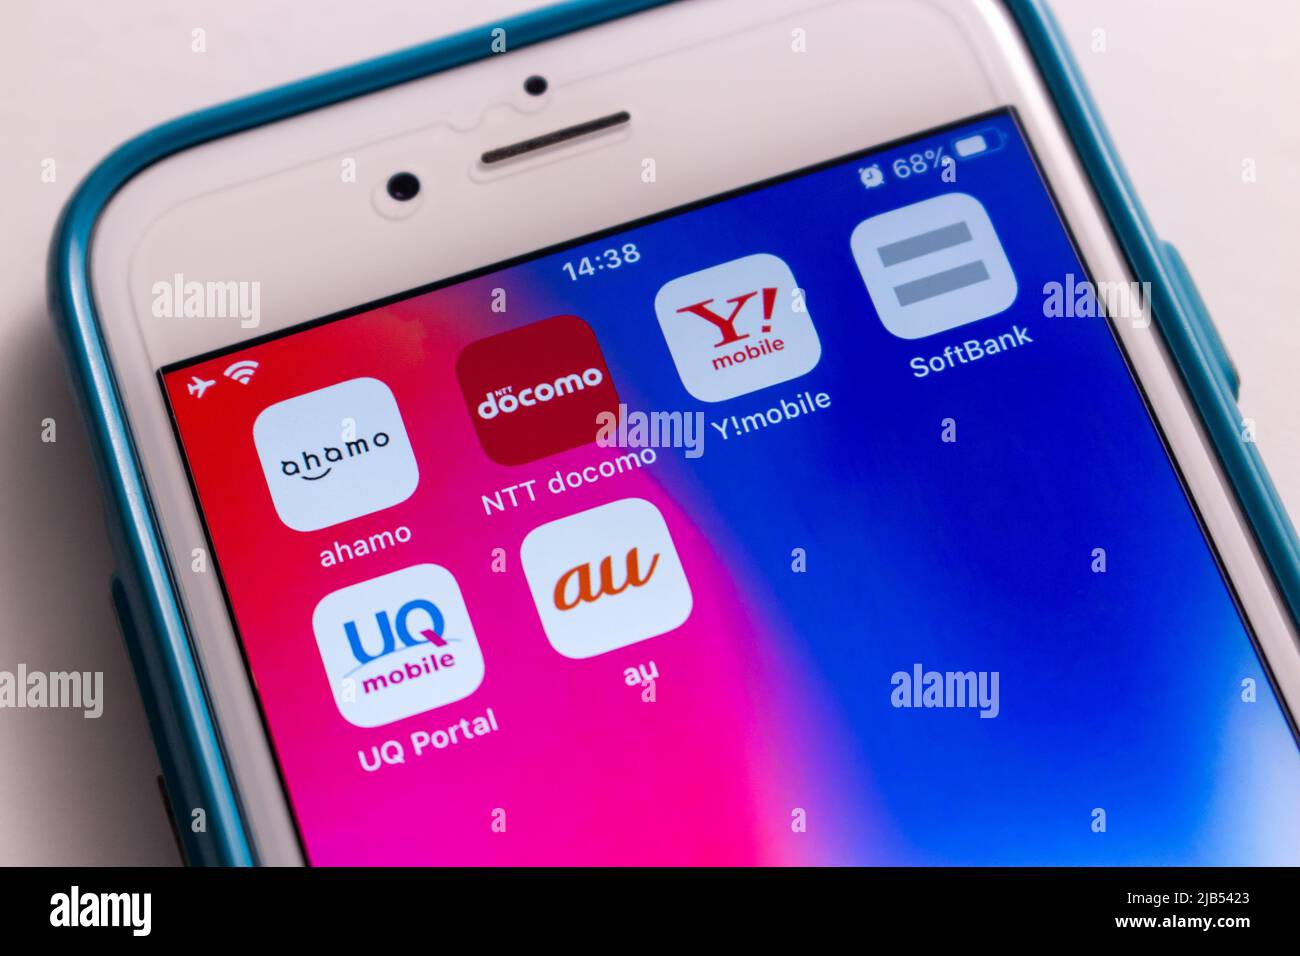 3 giant mobile carriers in Japan (au by KDDI, NTT docomo and SoftBank) with their subsidiary mobile brands Ahamo, Y!mobile, UQ Mobile on iPhone. Stock Photo